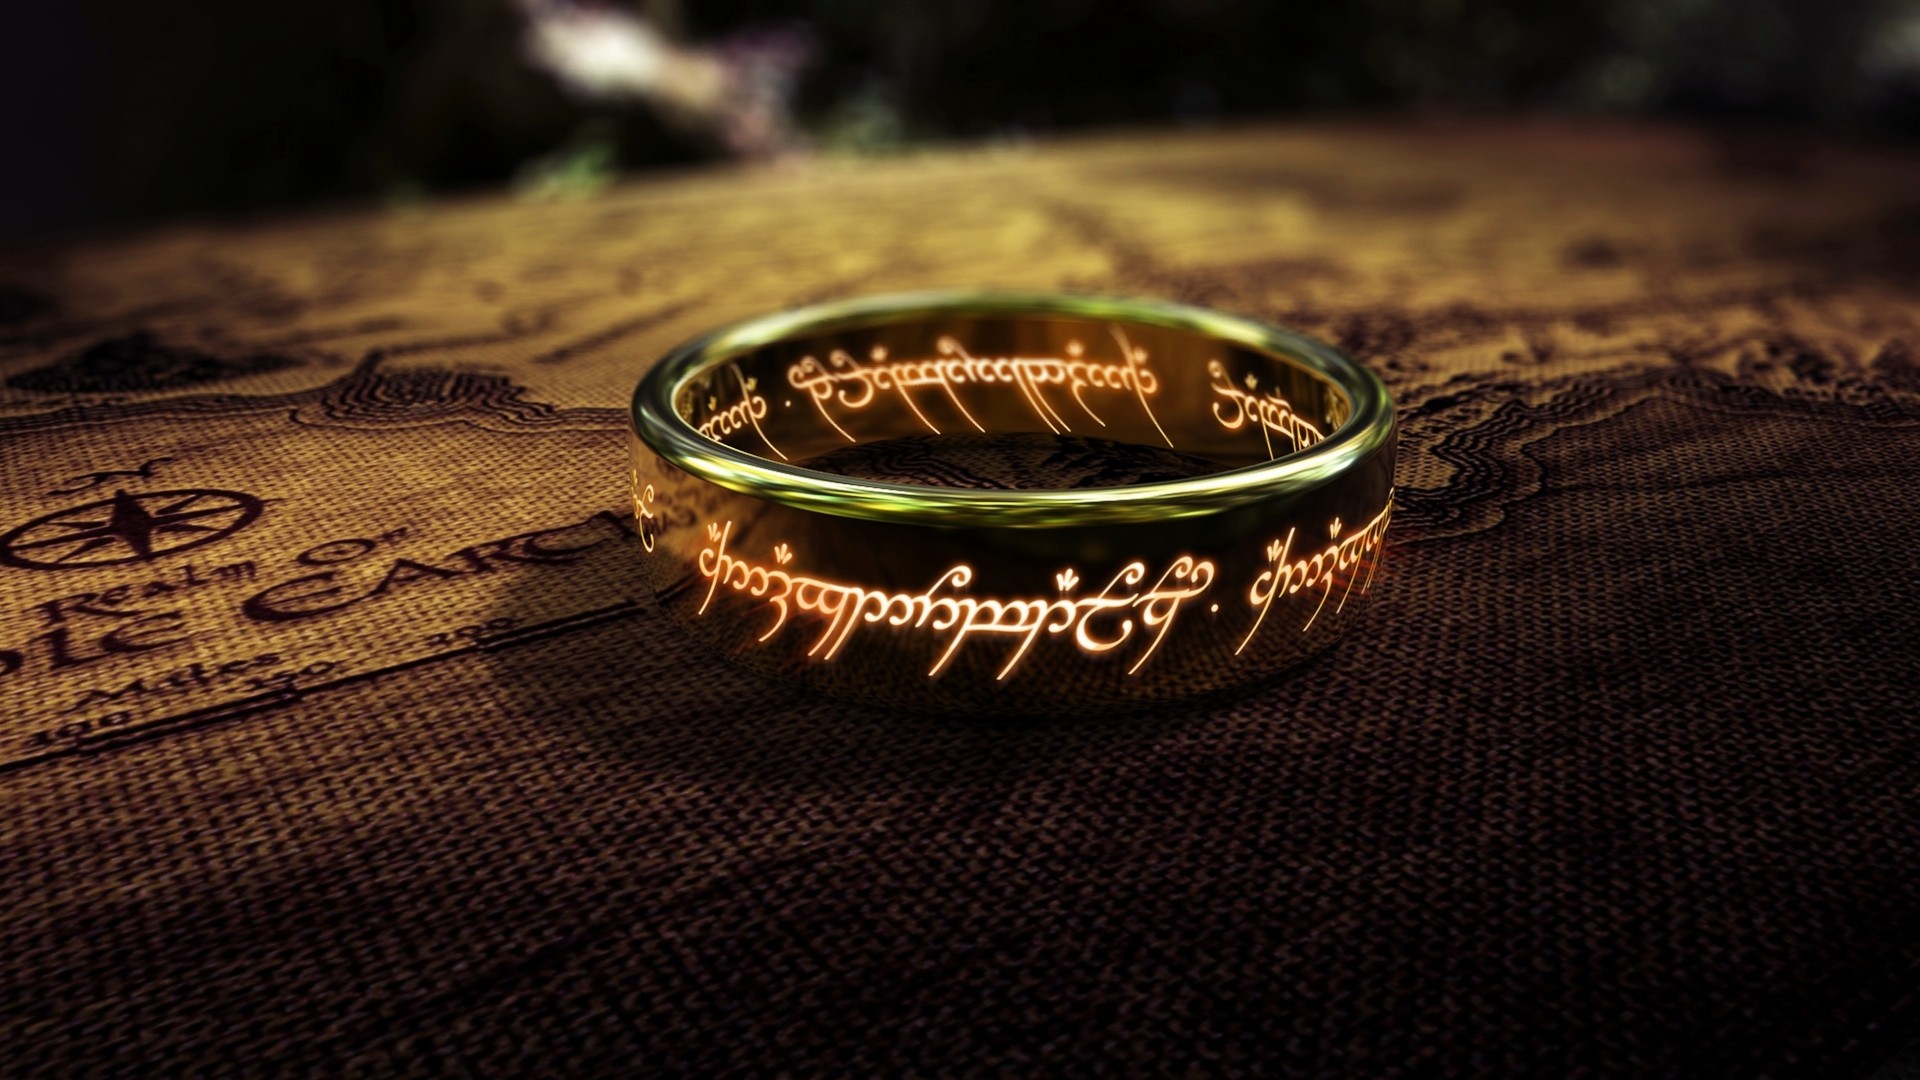 Free HD movie, the lord of the rings, ring